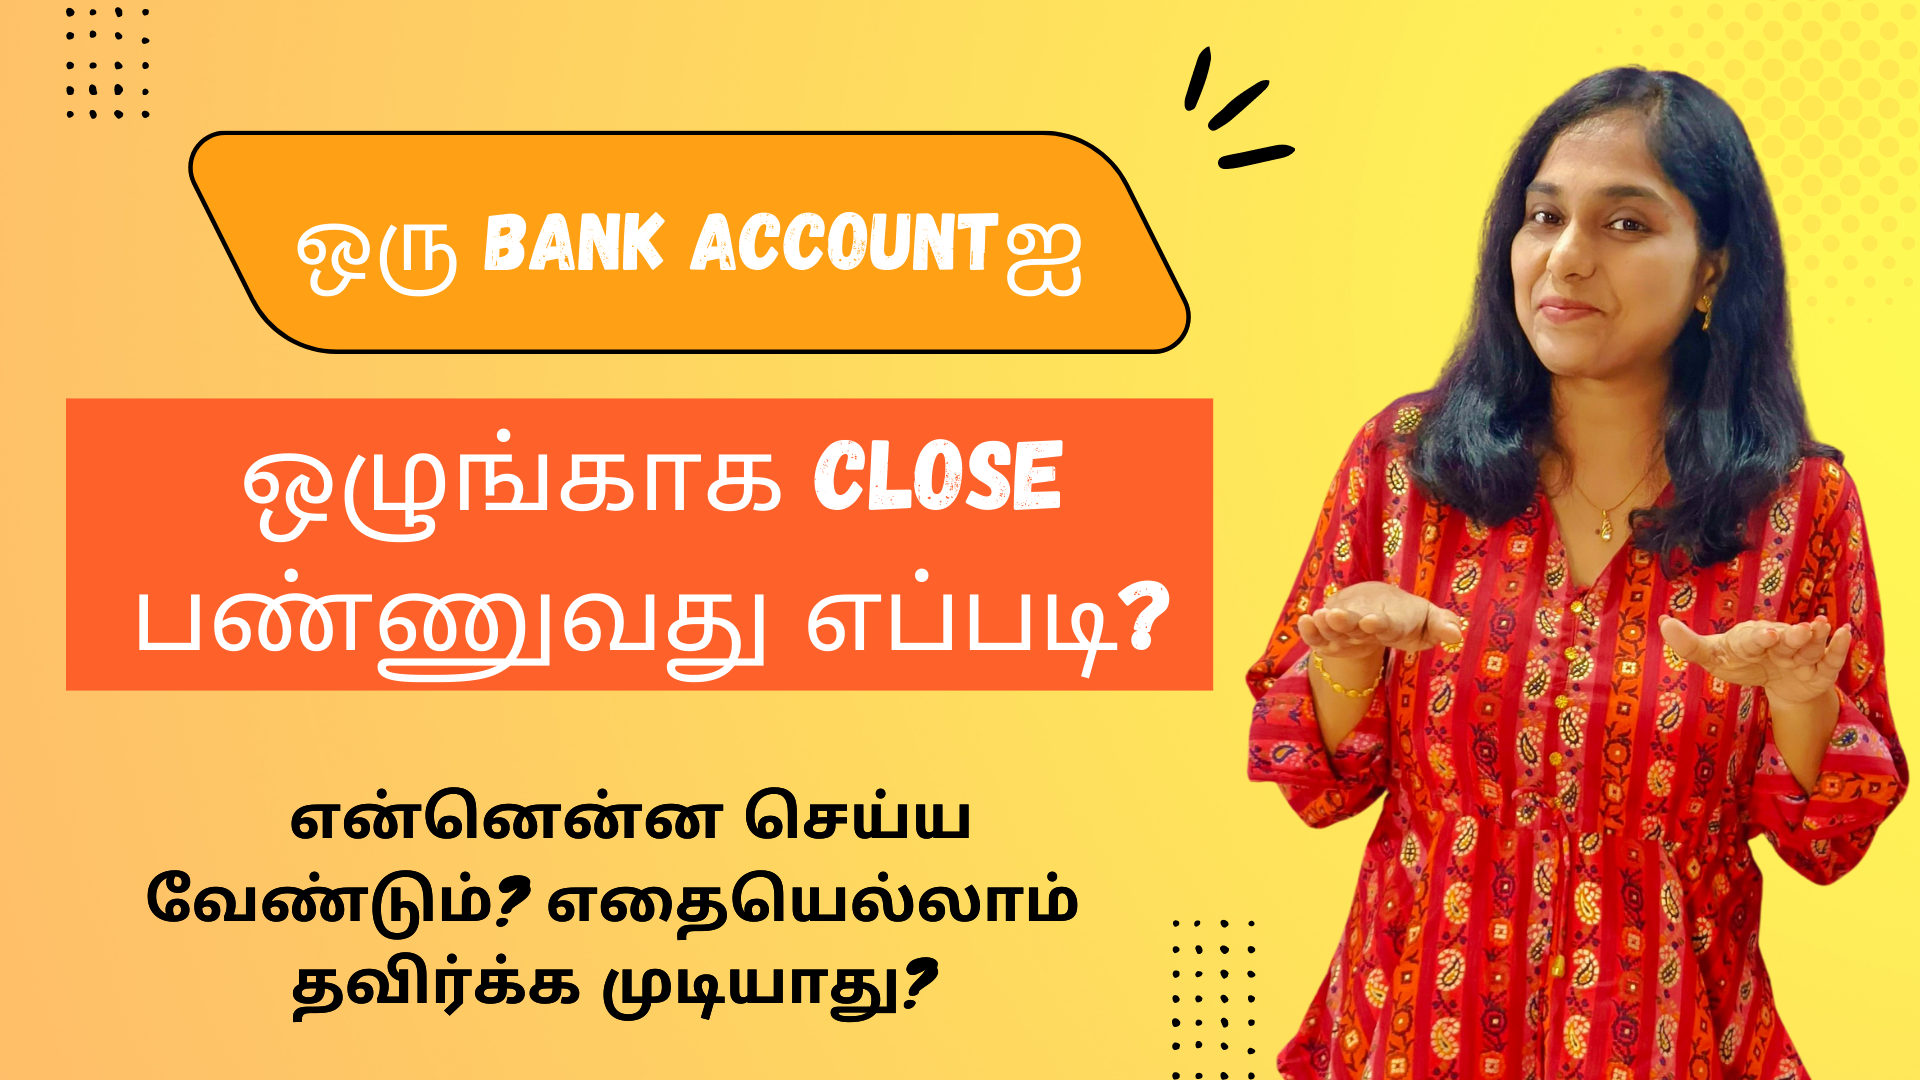 How To Close A Bank Account Properly? What Are The Things You Need To Do And Take Care Of?